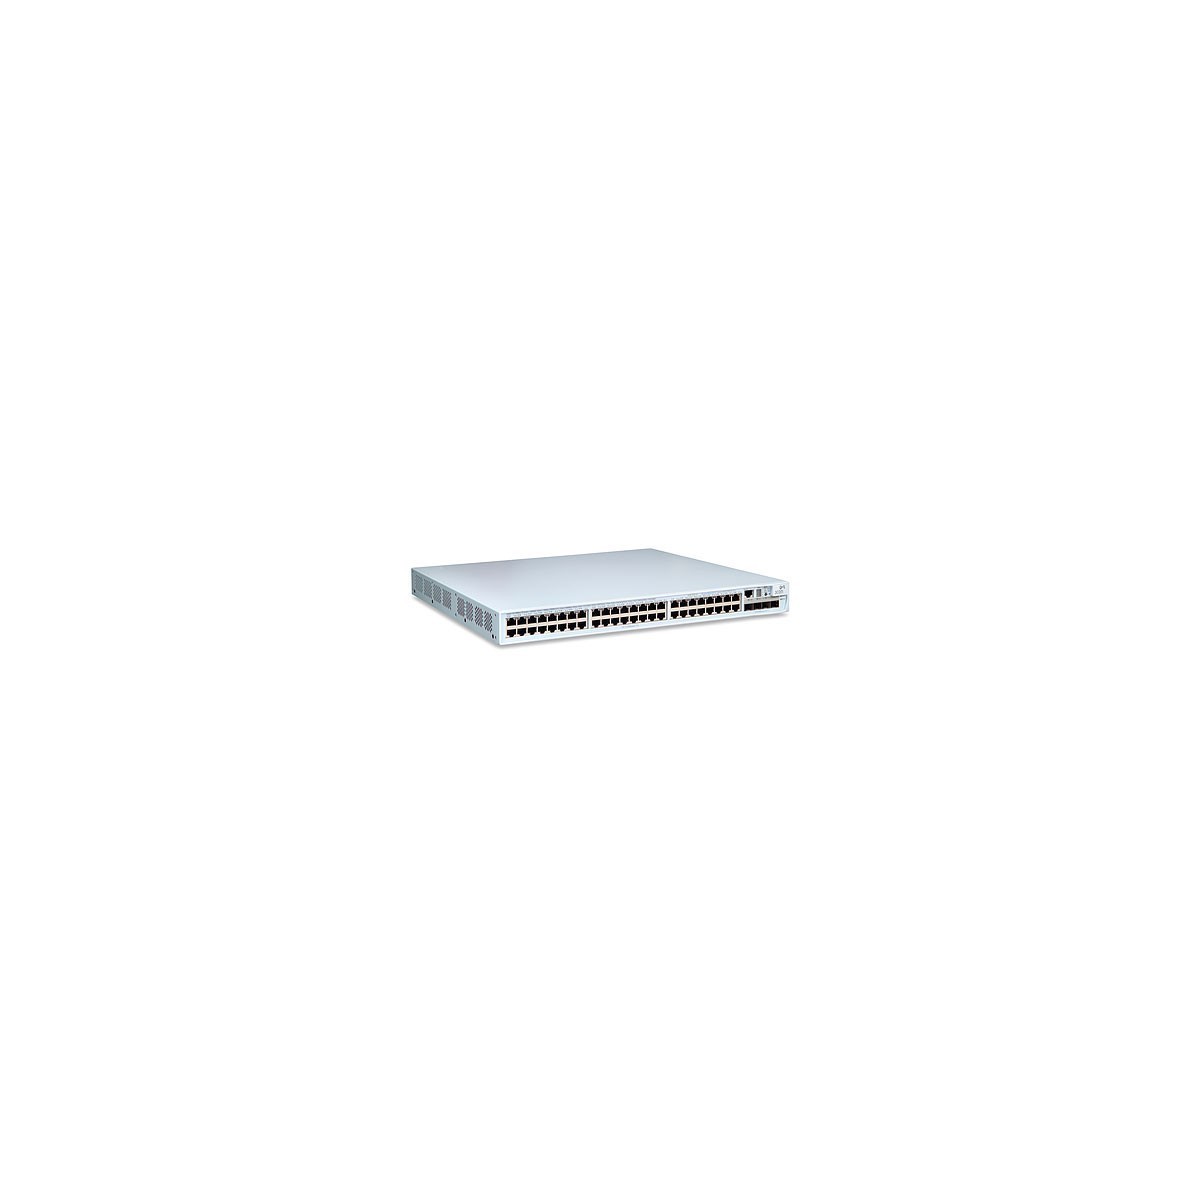 HPE E4500-48-PoE Switch - Managed - L3 - Full duplex - Power over Ethernet (PoE)